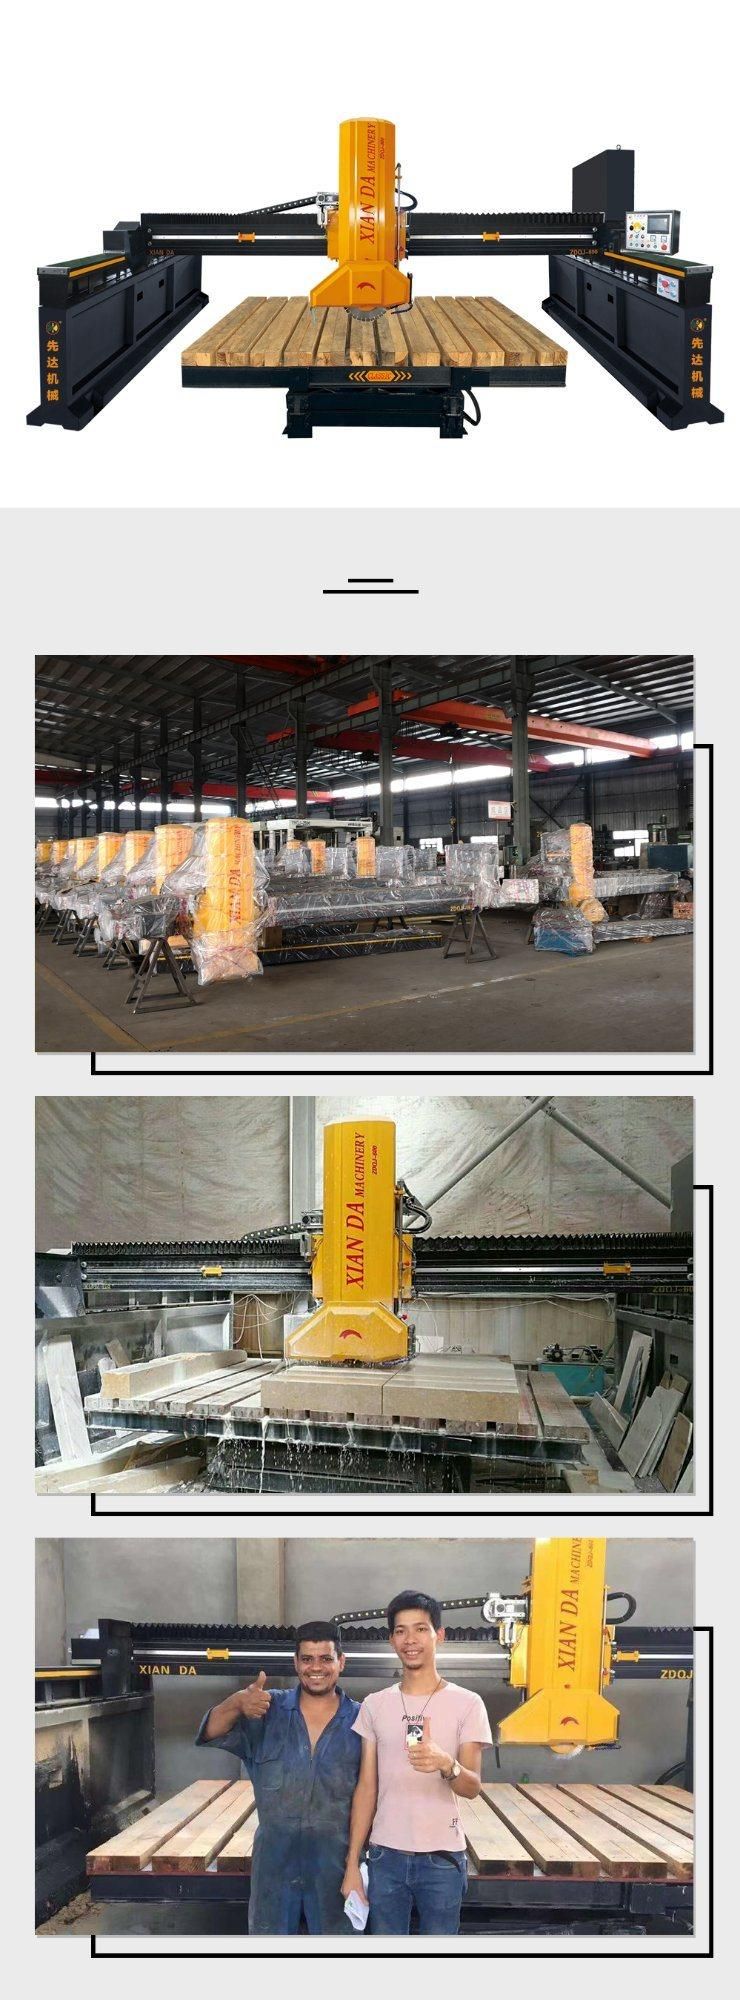 Xianda Stone Machinery Hlsq-700 Infrared Granite Marble Bridge Saw Cutter Slab Cutting Machine with Tilt Table for Sale